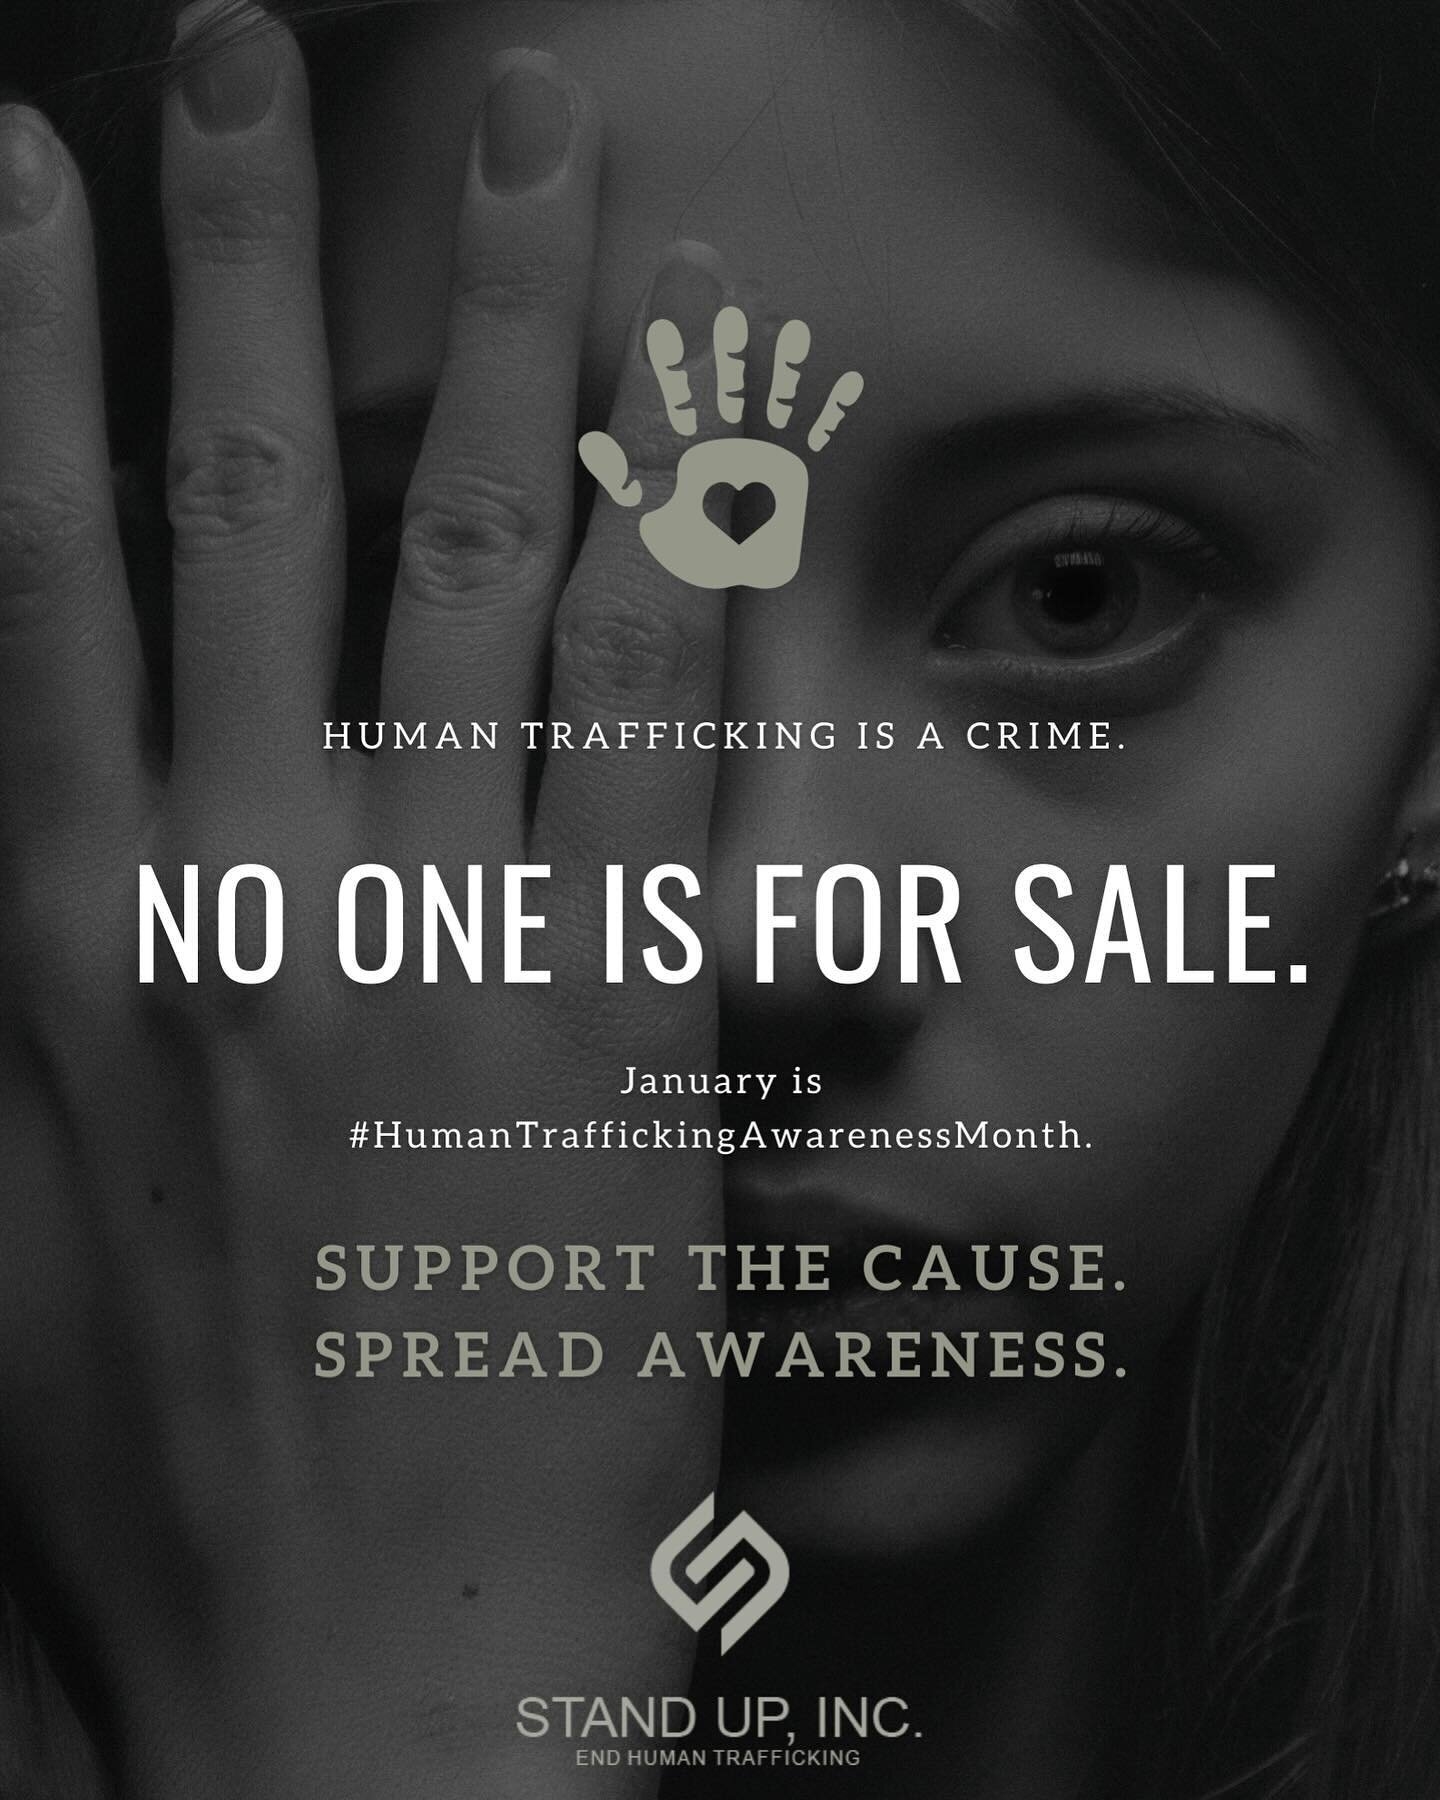 NO ONE is for sale. Period. 🤚🏼

Stand Up against human trafficking.